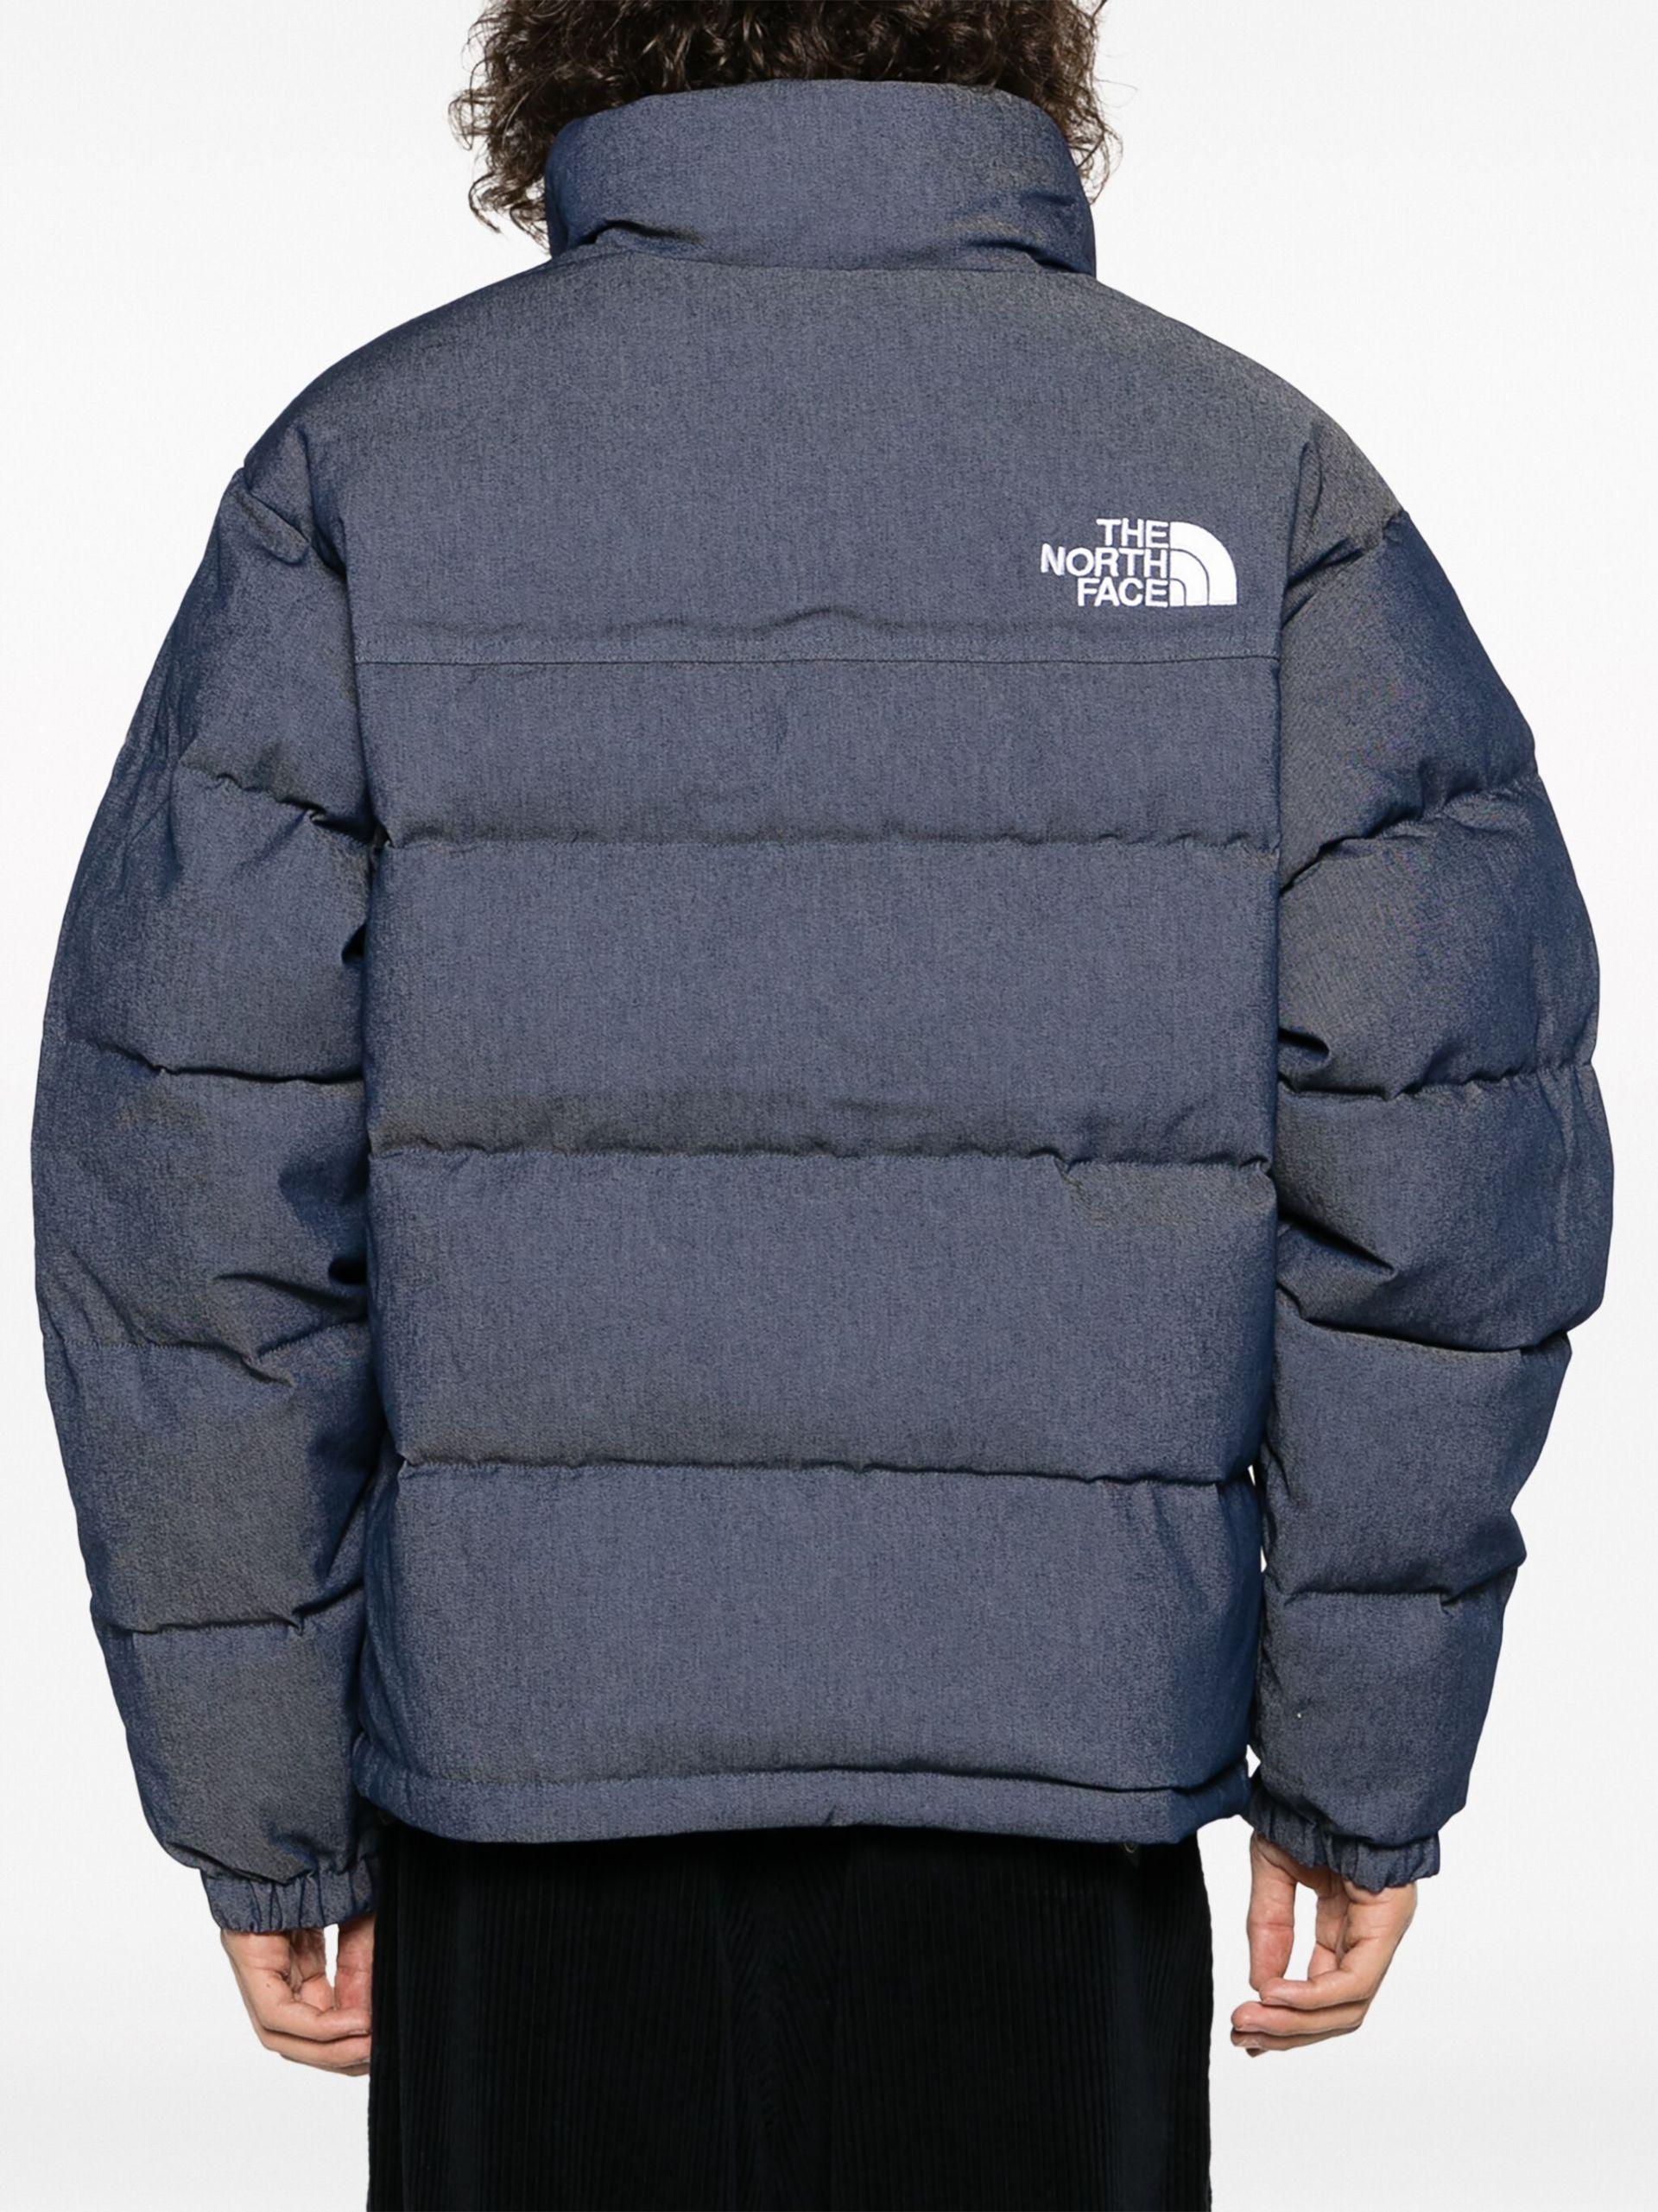 The North Face 1992 Nuptse Reversible Padded Jacket in Blue for